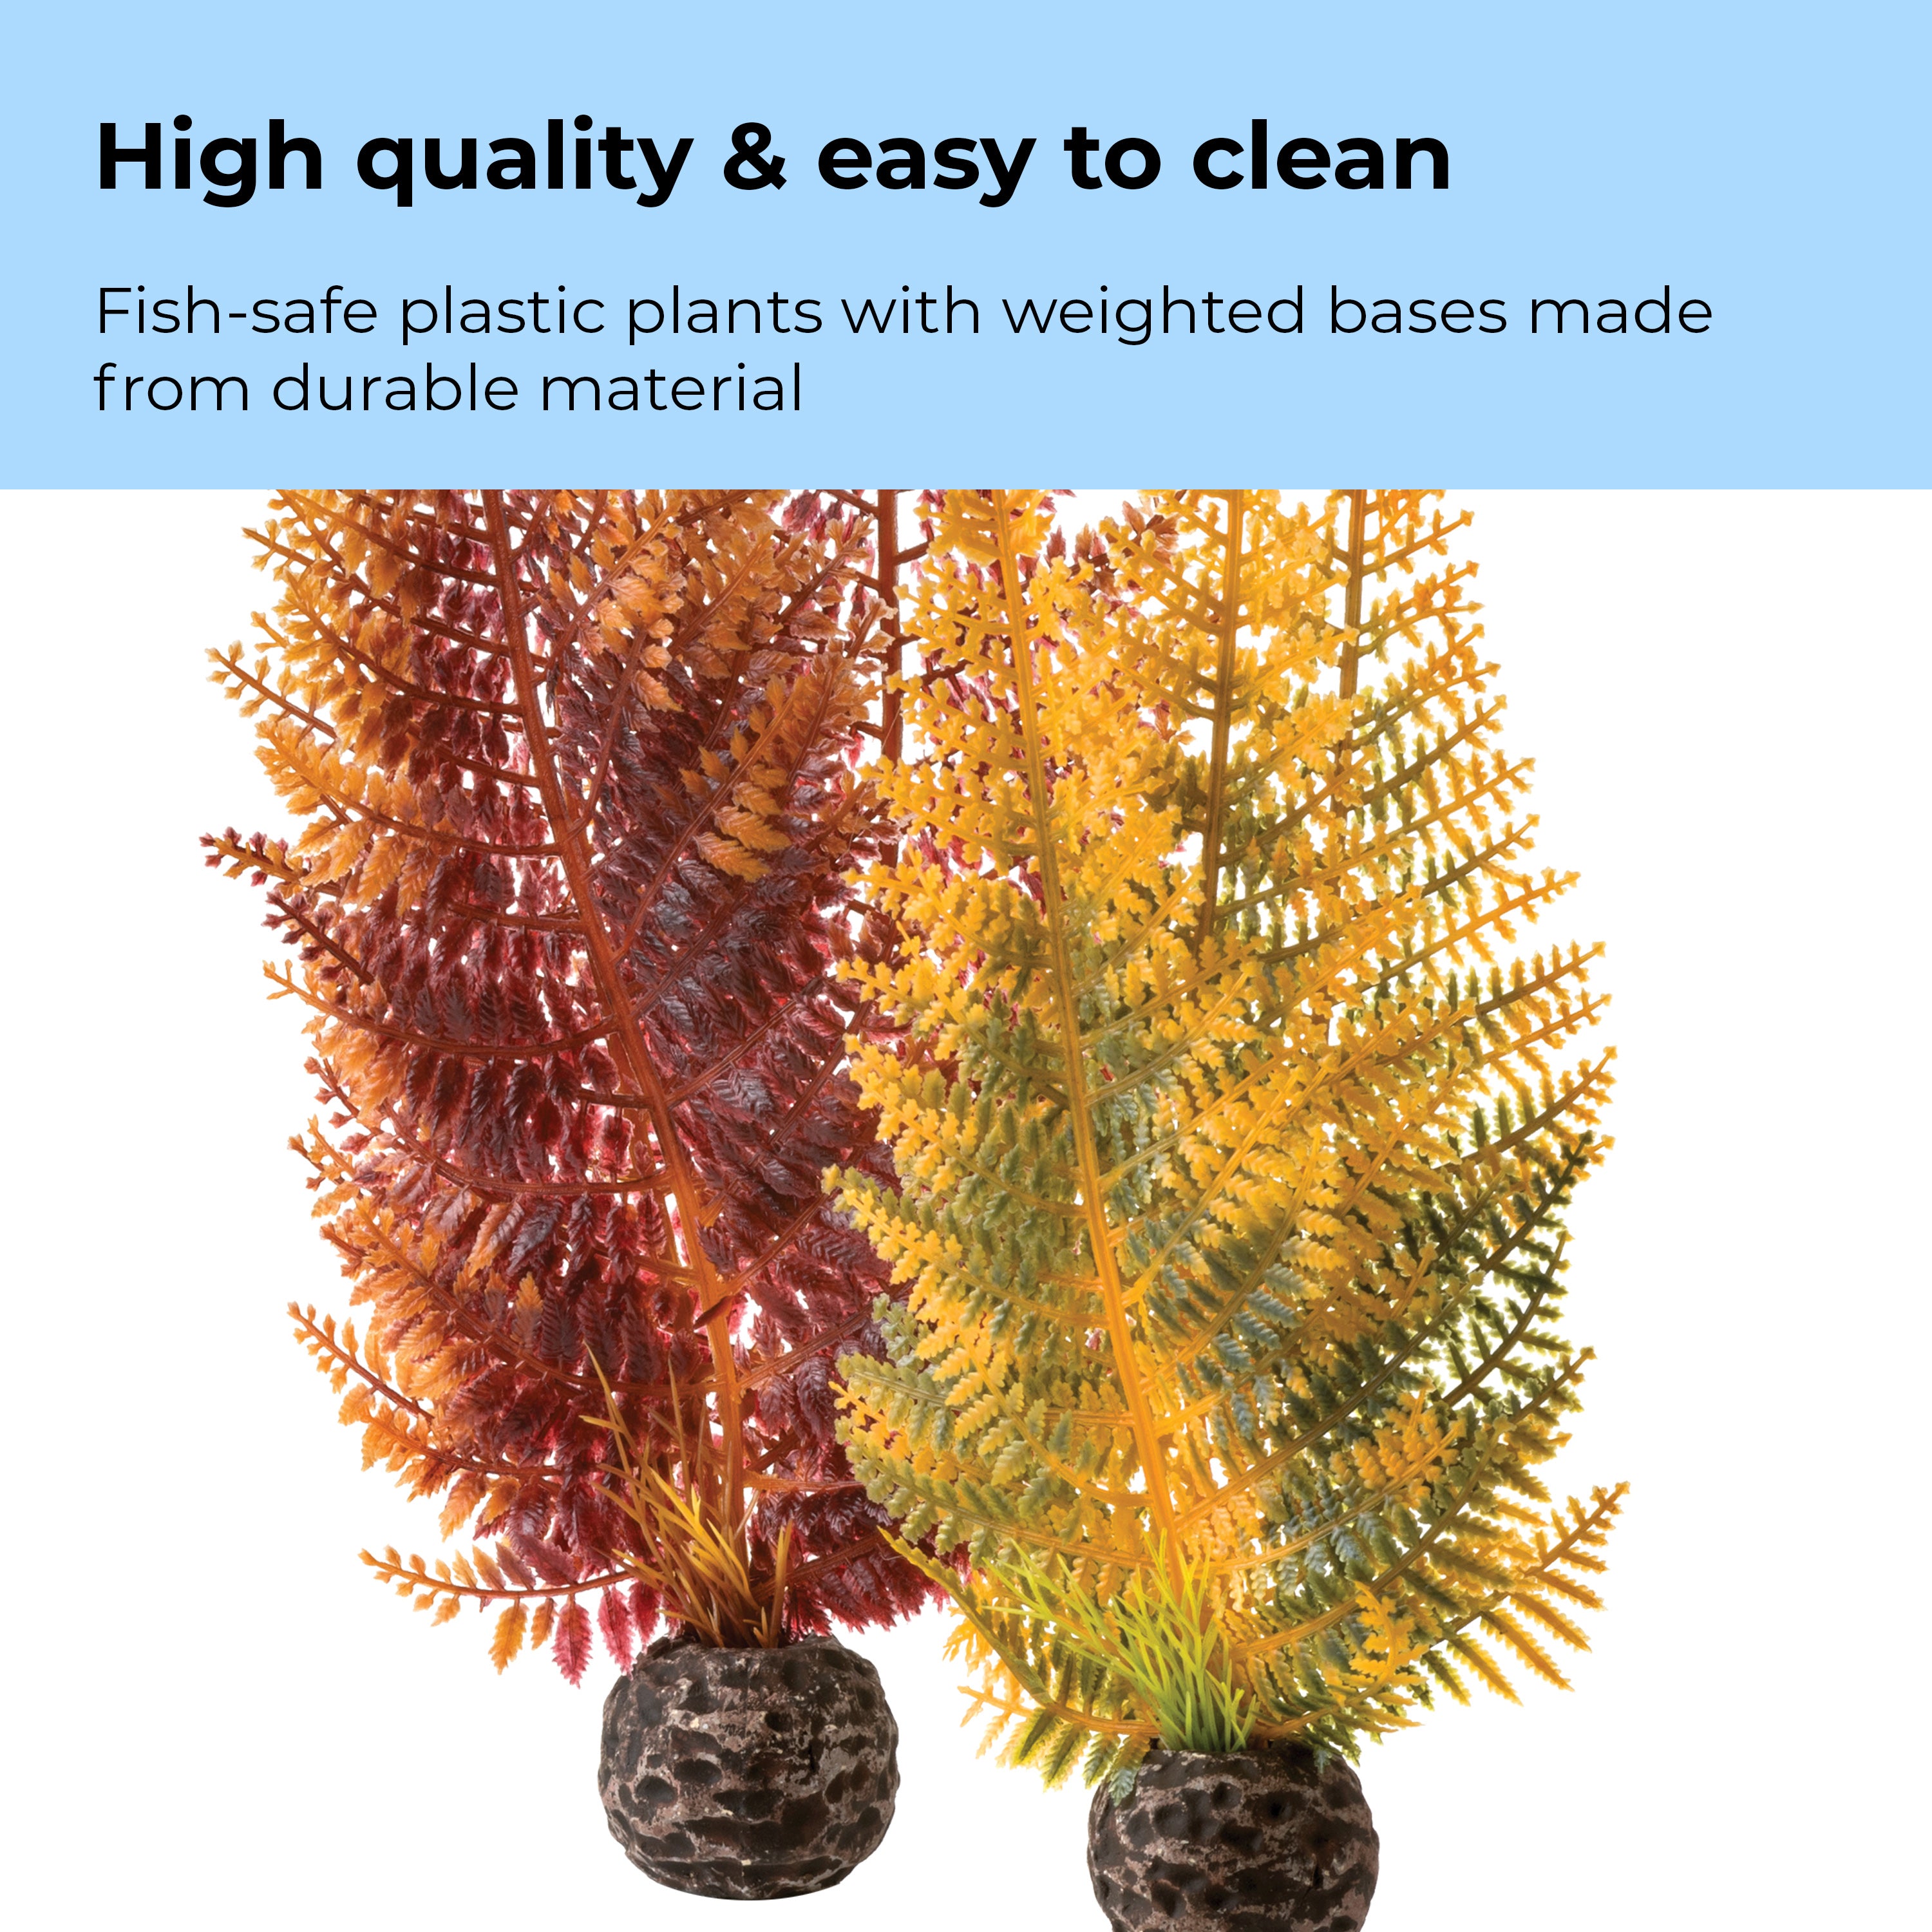 Fern Plant Set - High quality & easy to clean